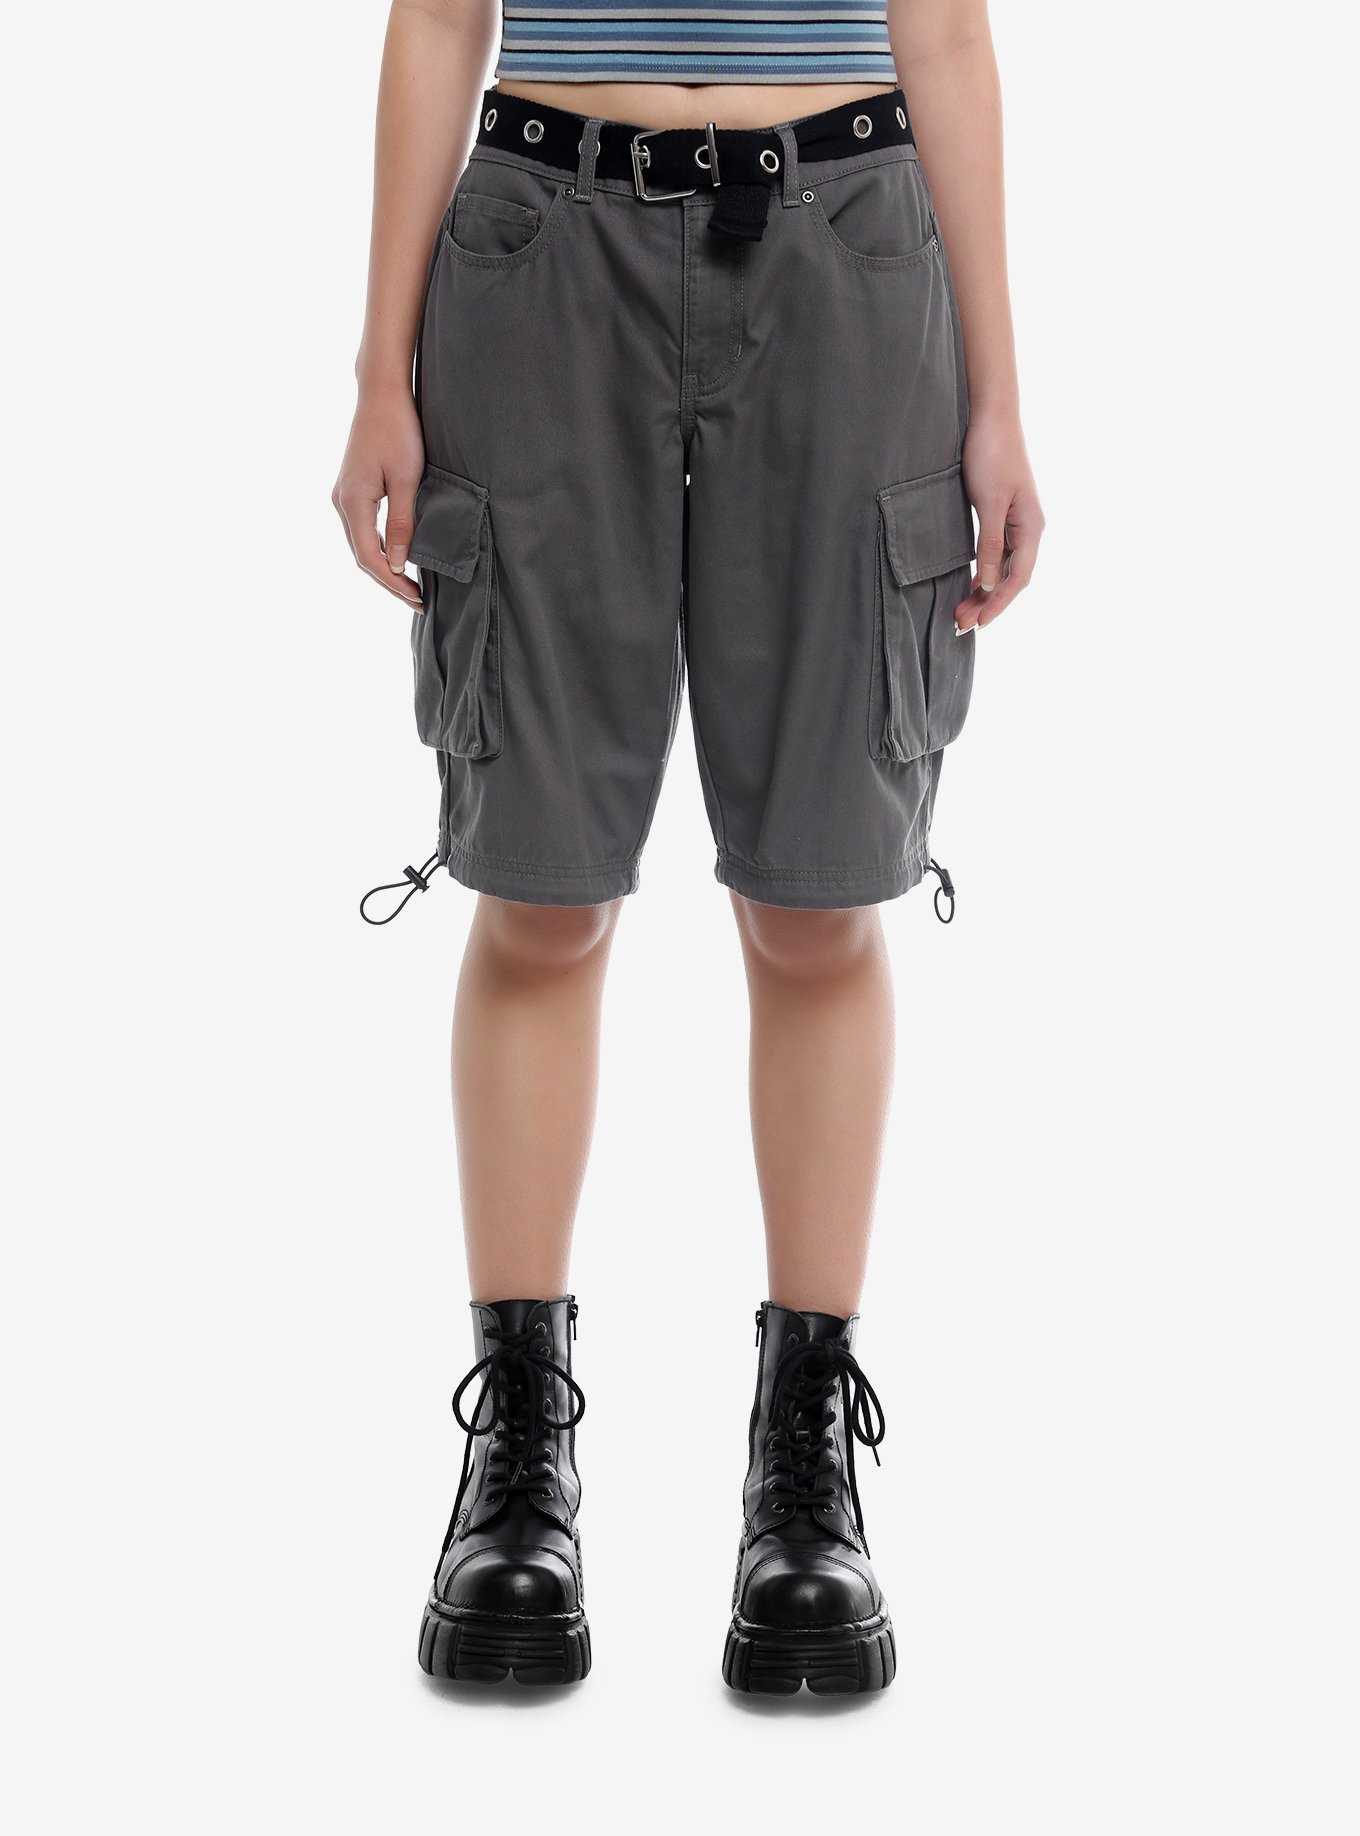 $5 off $50 Sale Special for New Users.Flap Pockets Chain Jogger Techwear  Pants